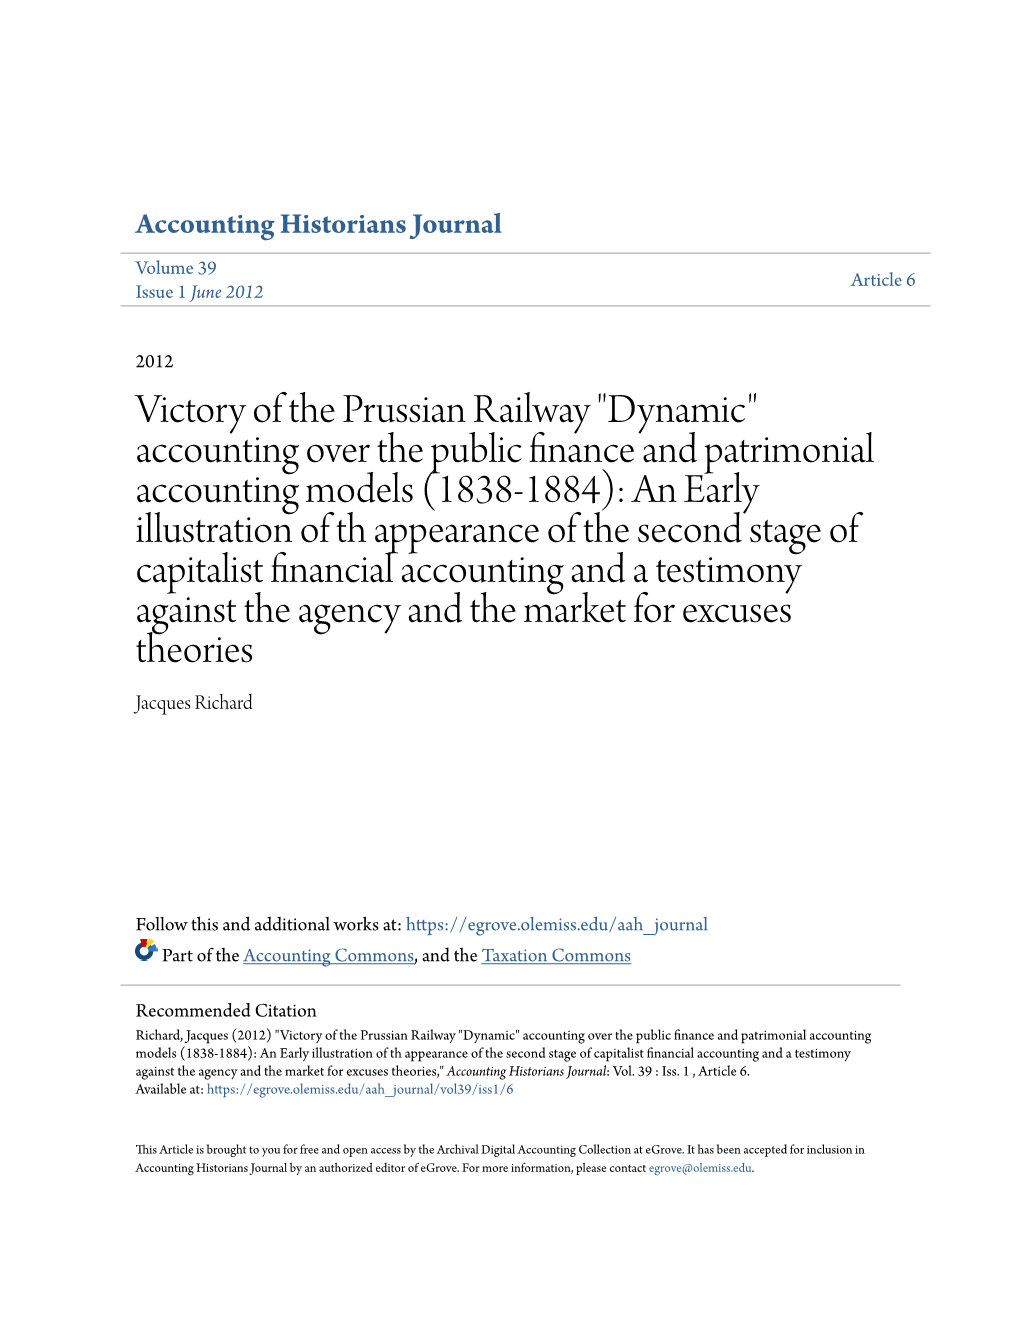 Victory of the Prussian Railway